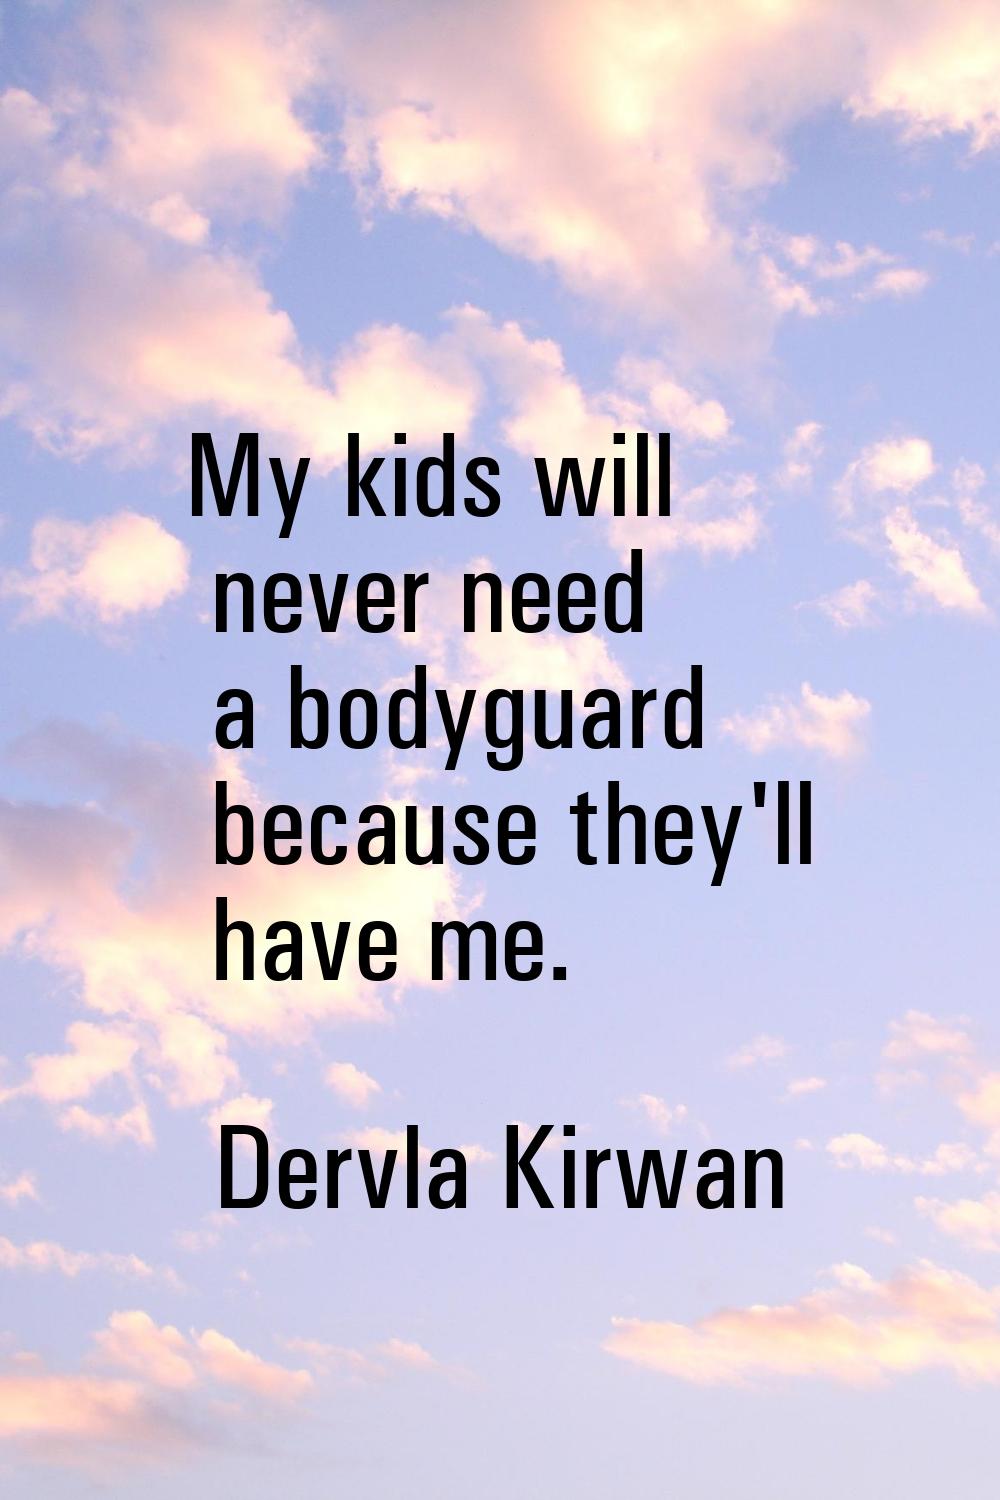 My kids will never need a bodyguard because they'll have me.